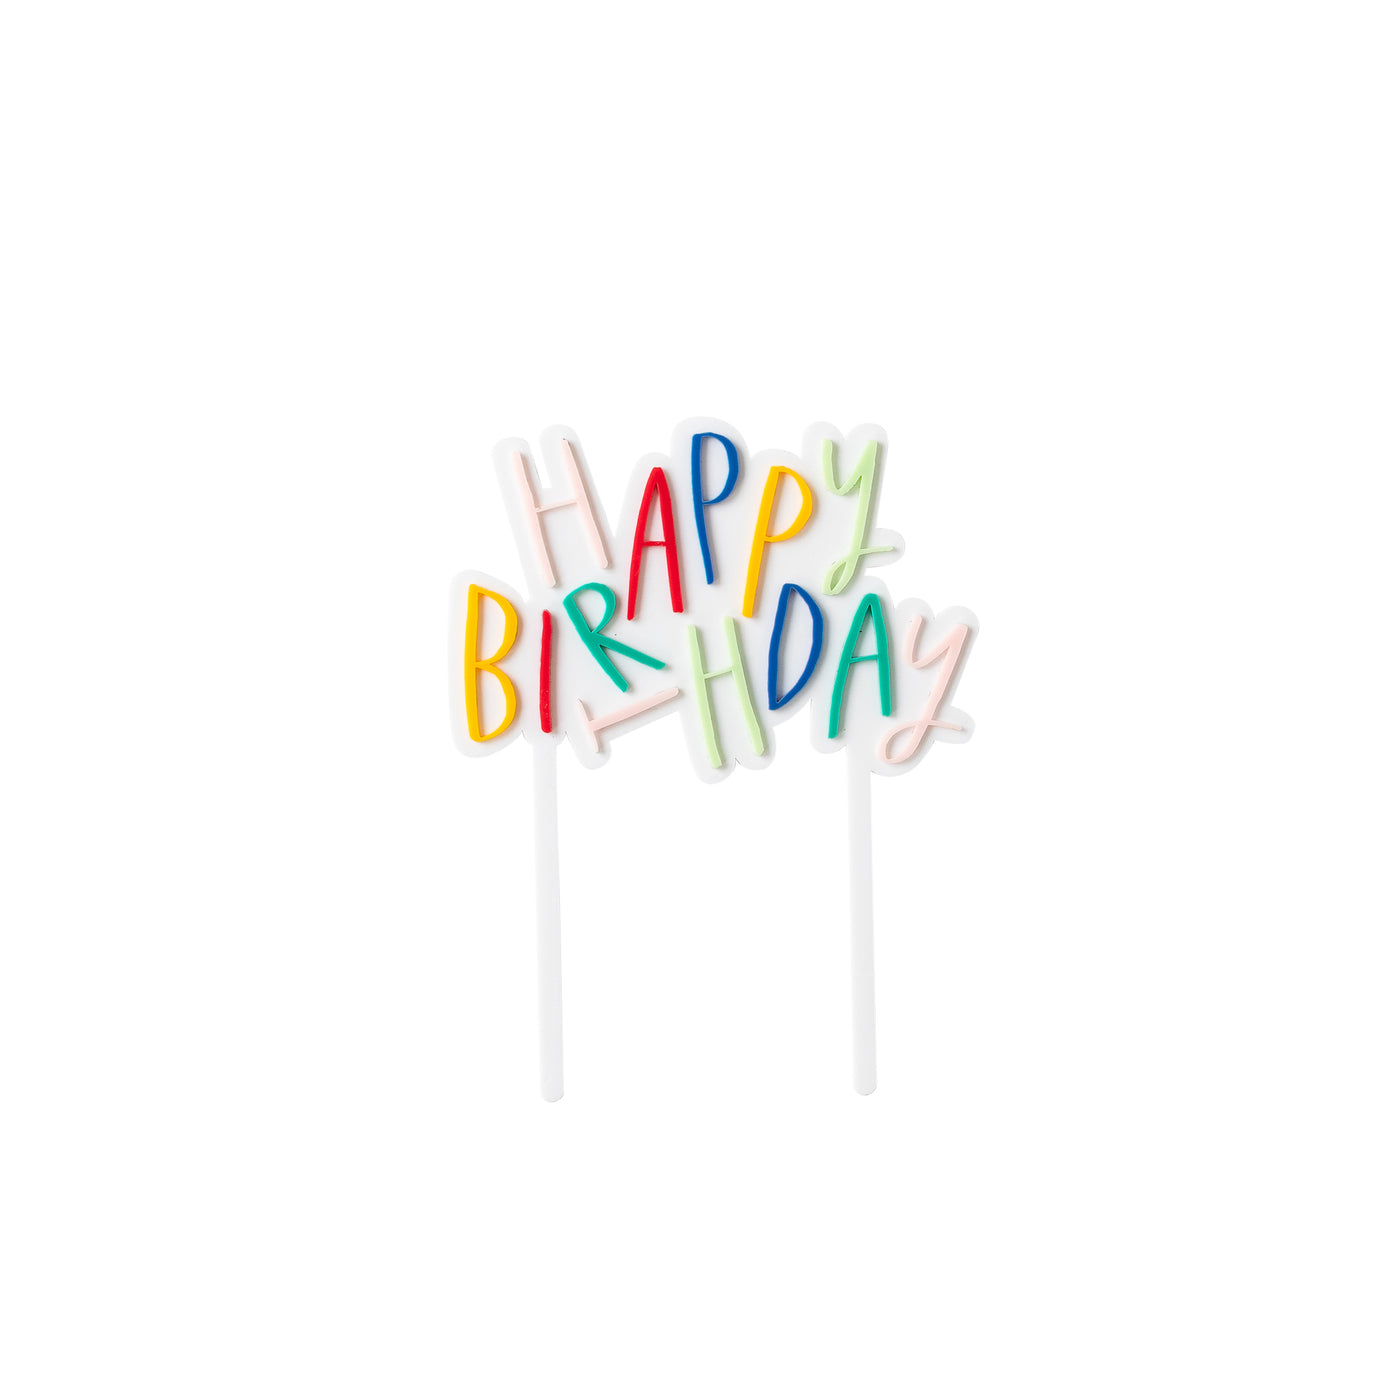 OPB810 - Oui Party Birthday Acrylic Cake Topper